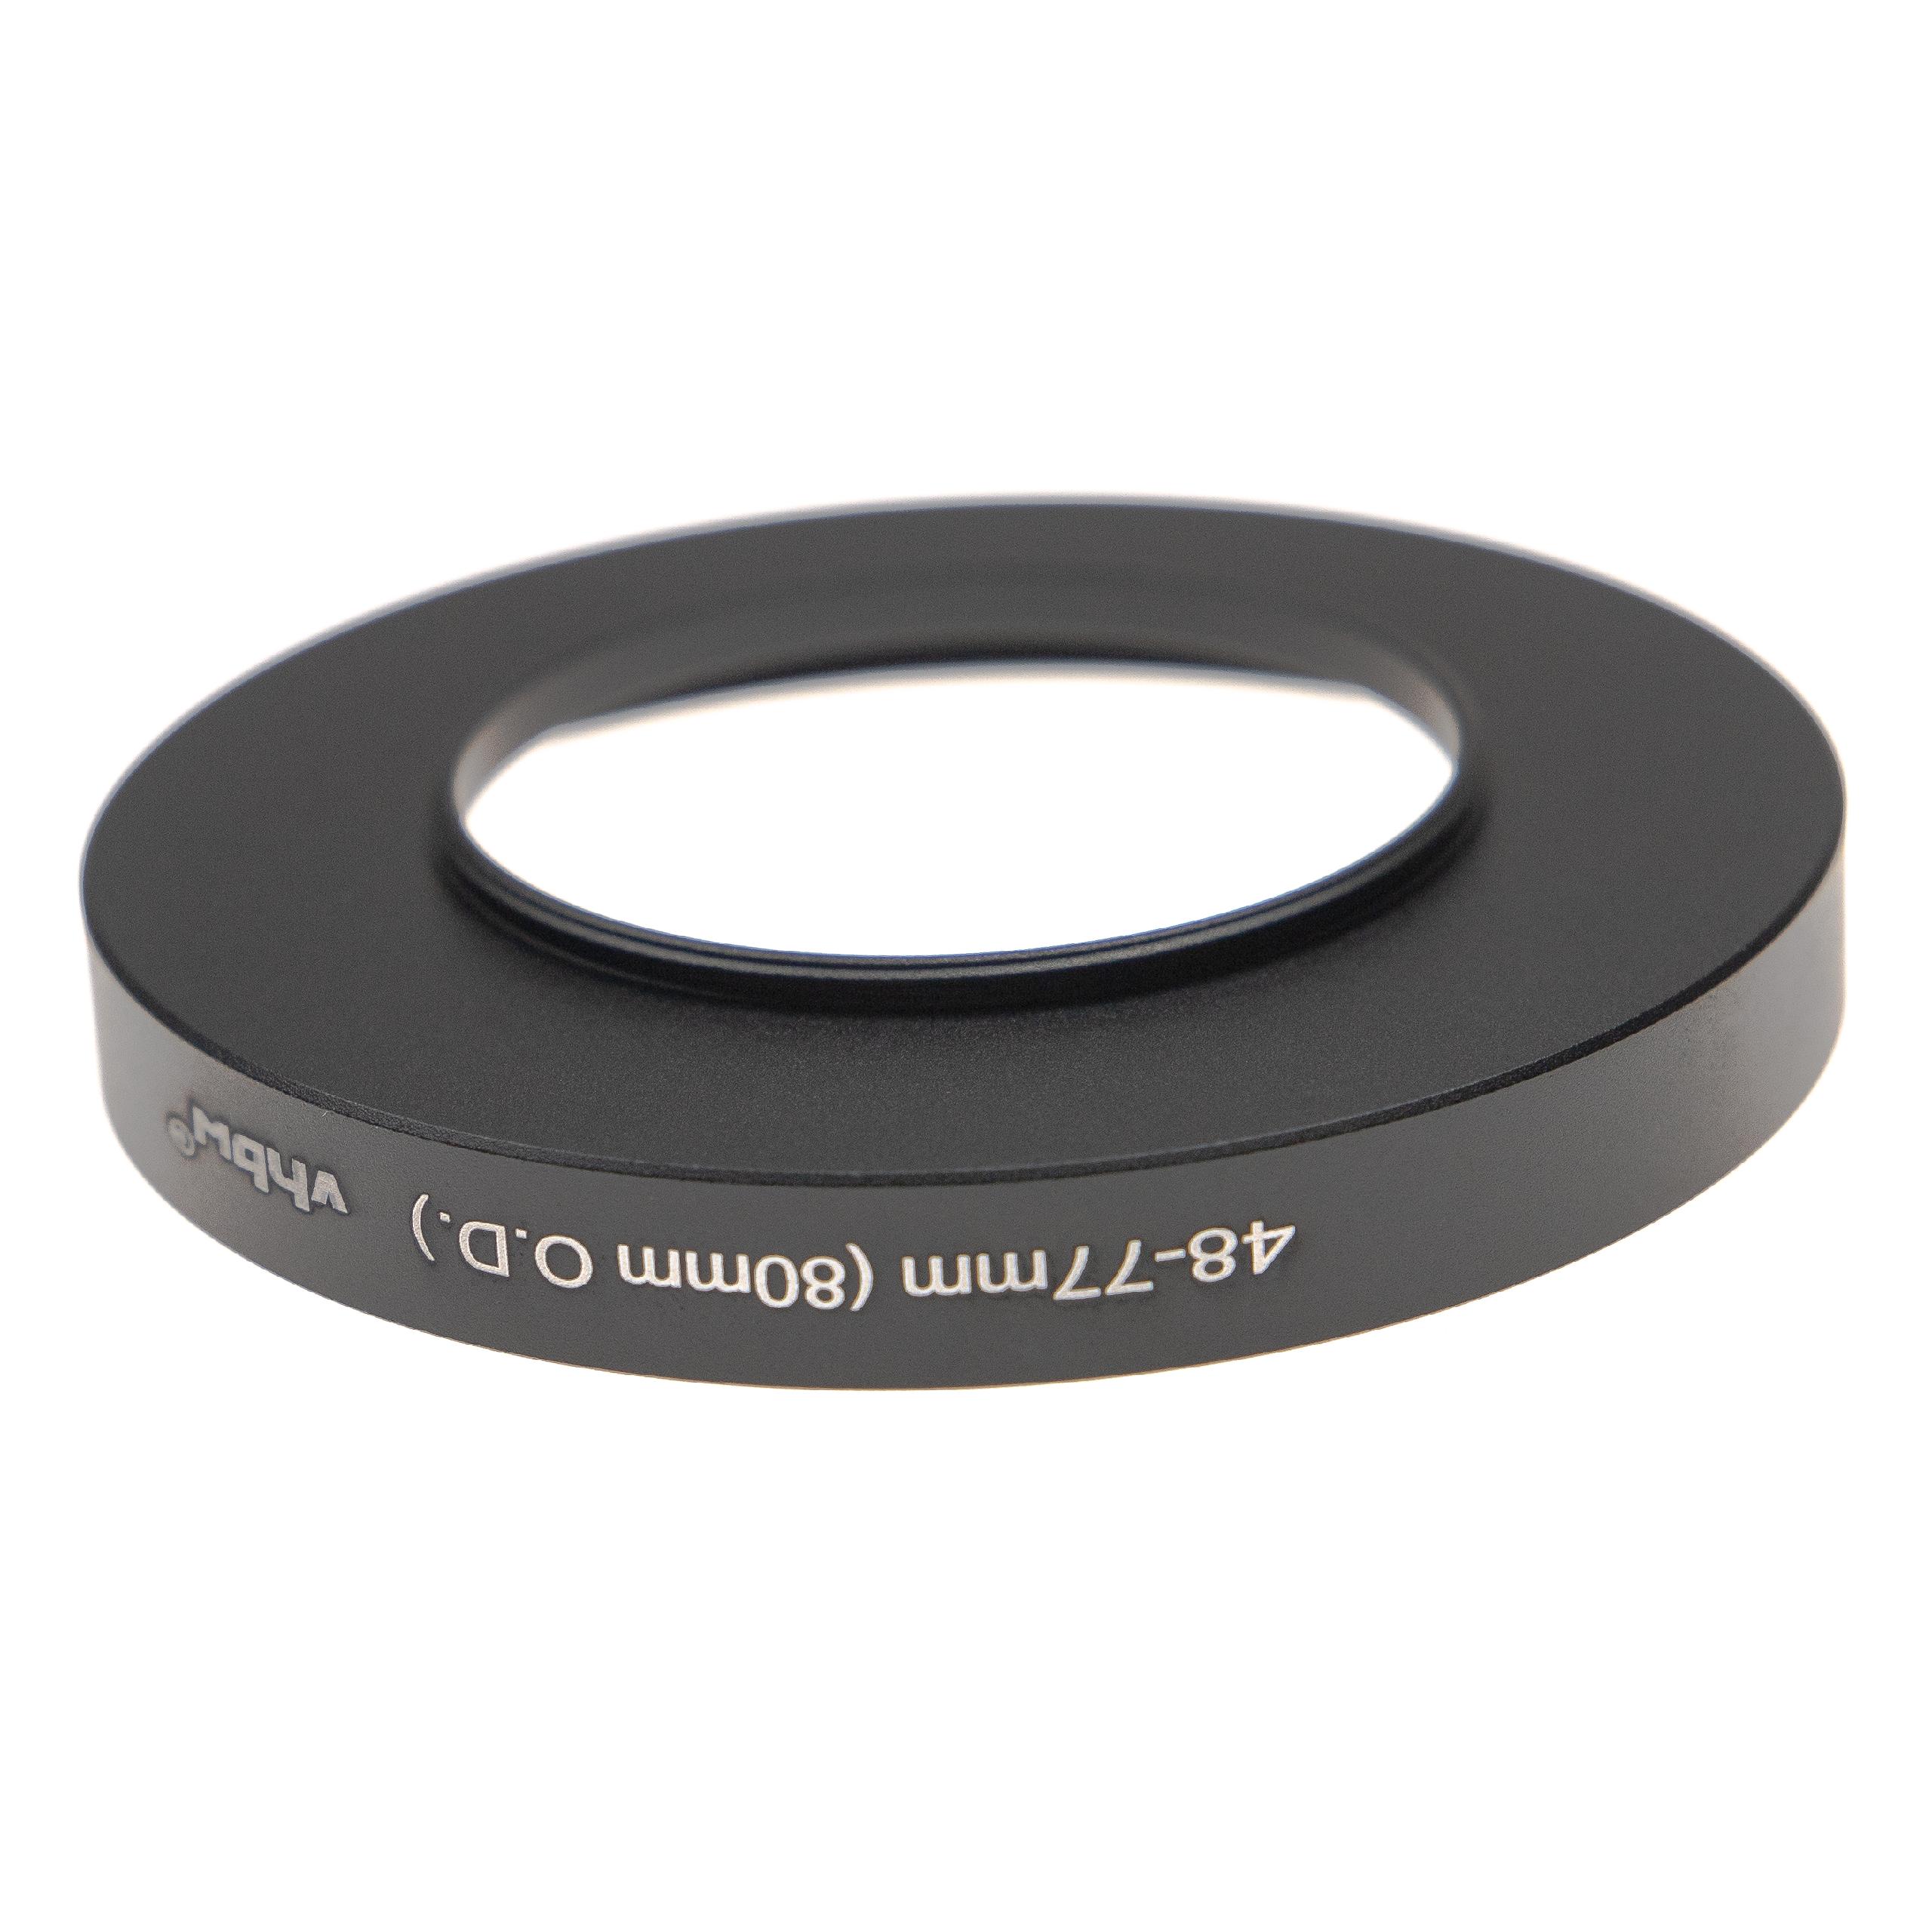 Step-Up Ring Adapter of 48 mm to 77 mm for matte box 80 mm O.D. - Filter Adapter